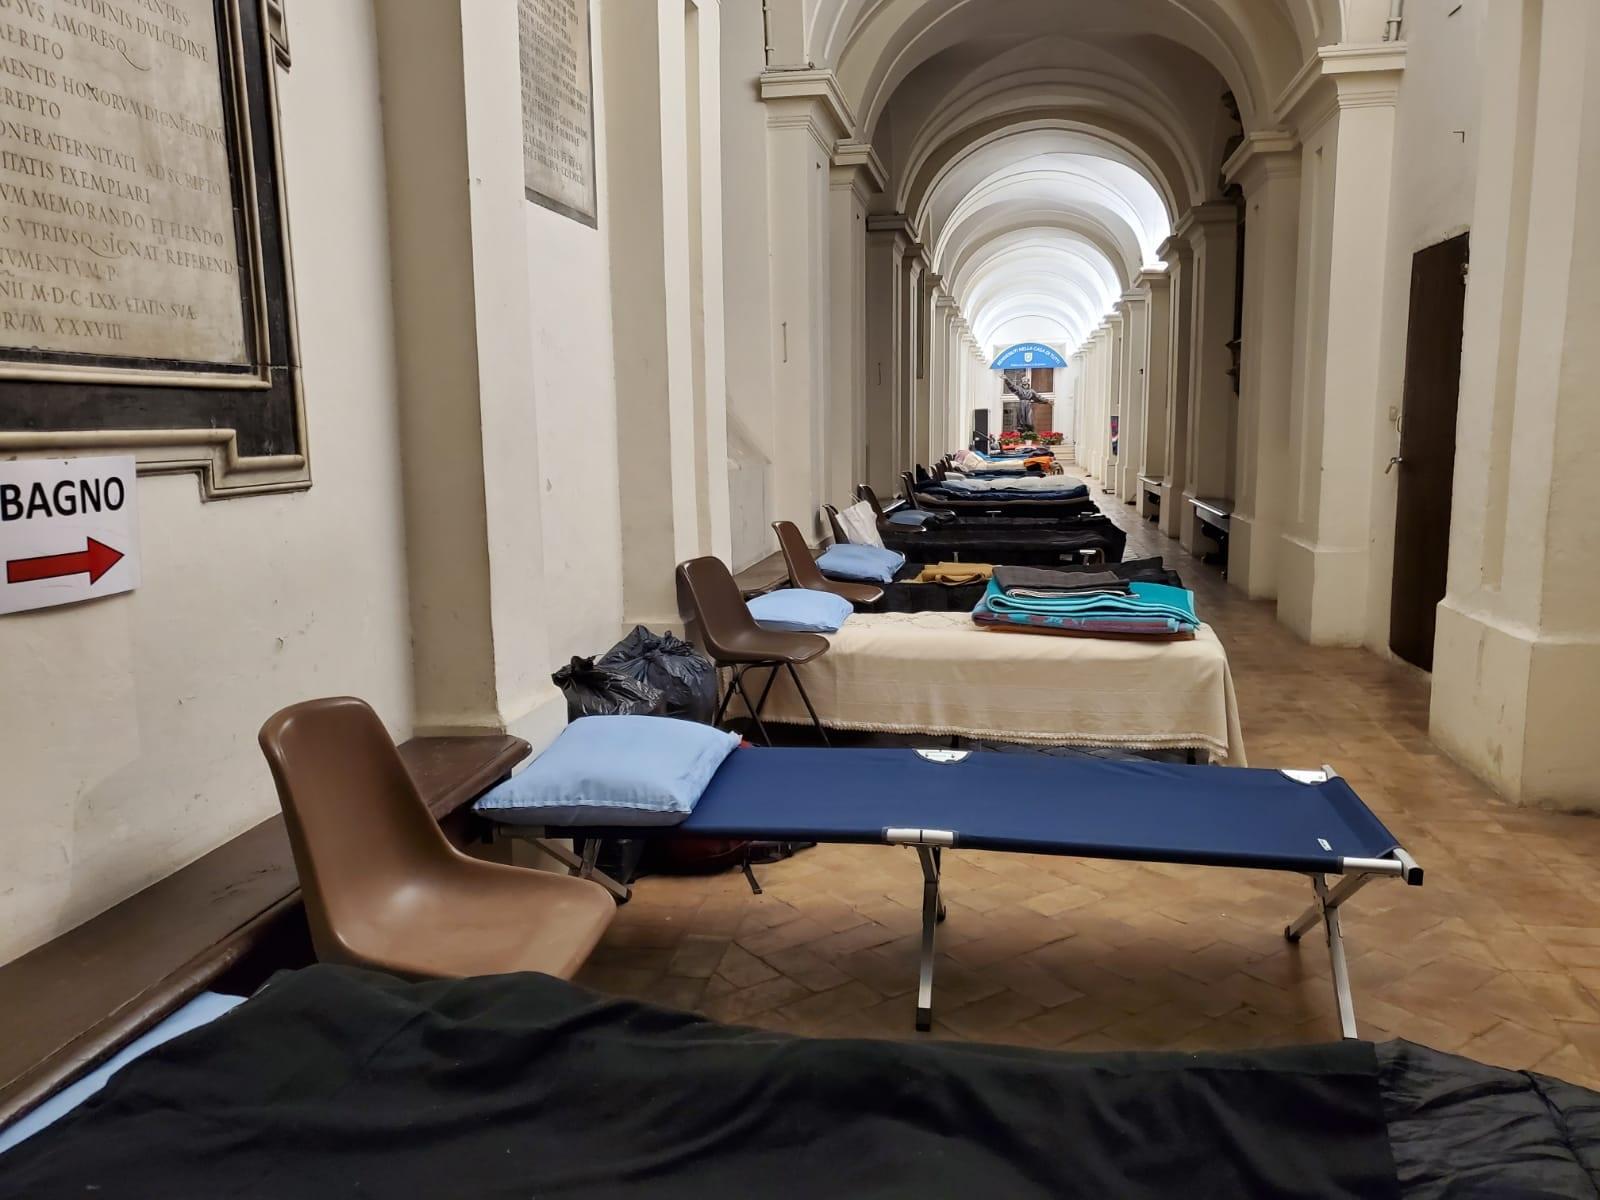 Parish in Rome opens doors to the poor, 24 hours a day